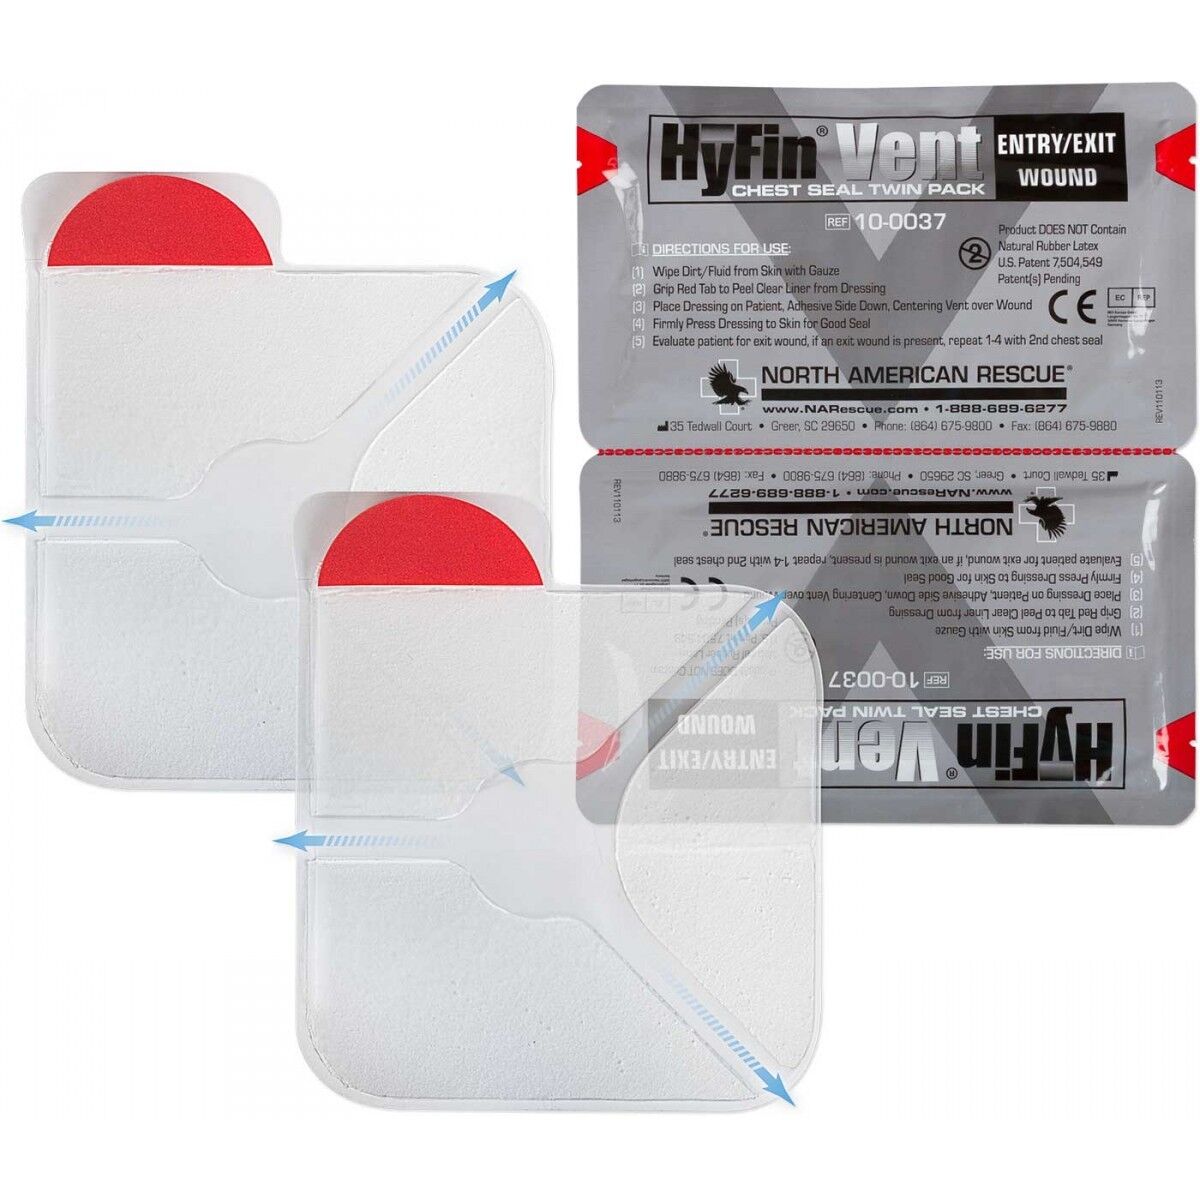 North American Rescue Hyfin Vent Chest Seal 2 Count Pack